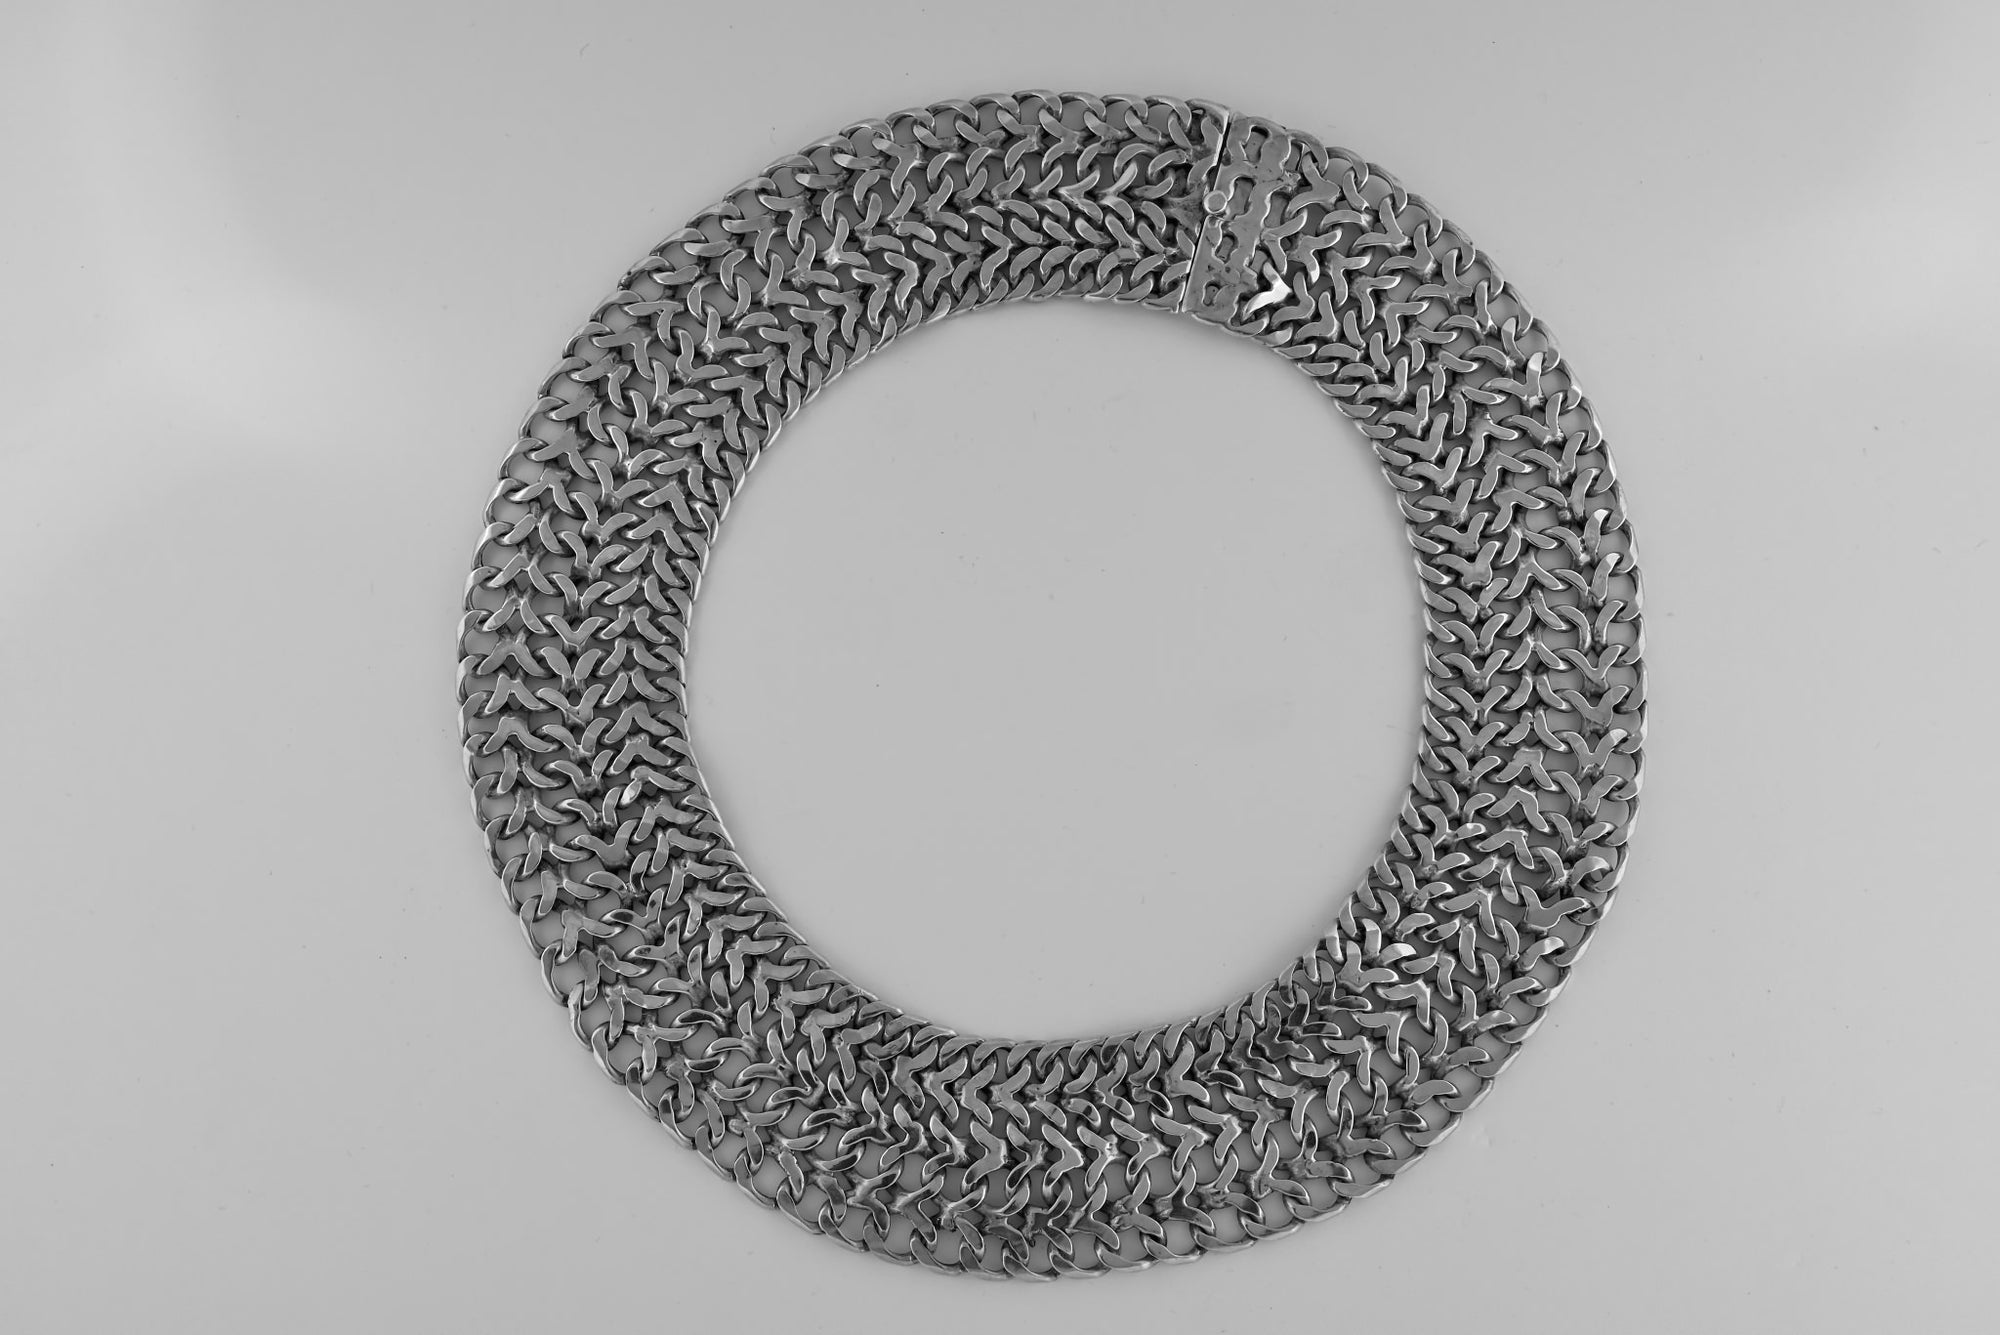 Woven Silver Collar (Mexico) by unknown